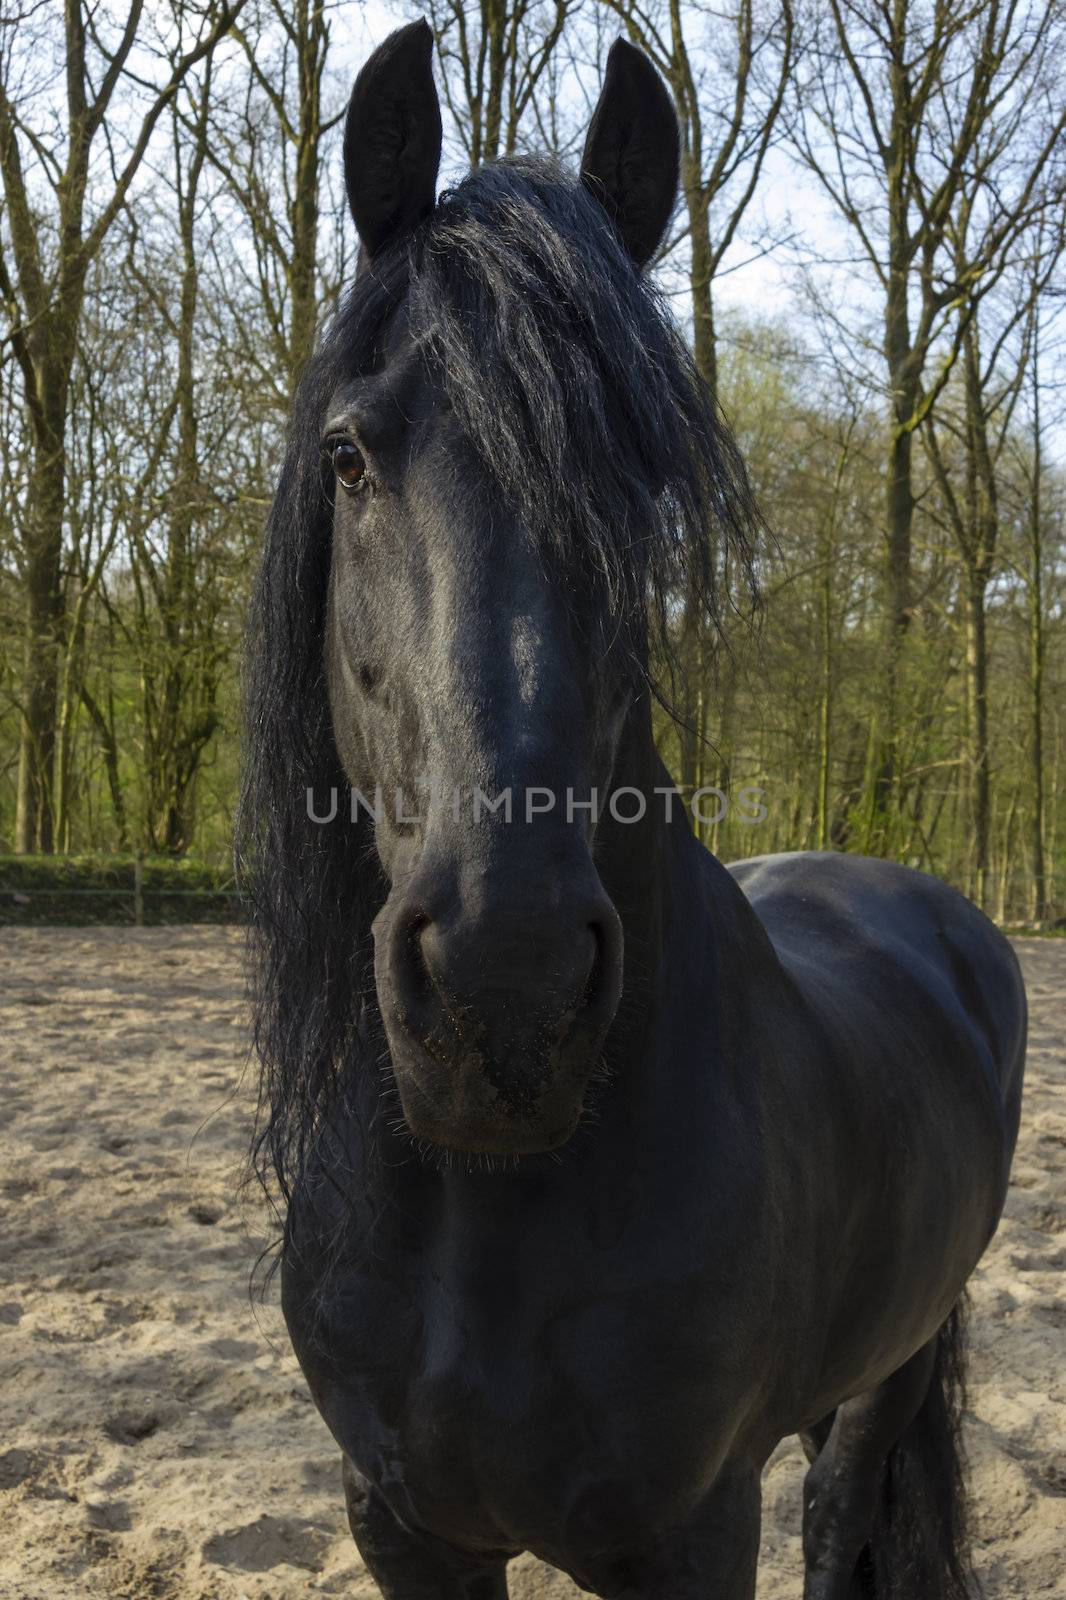 Funny black horse by Tetyana